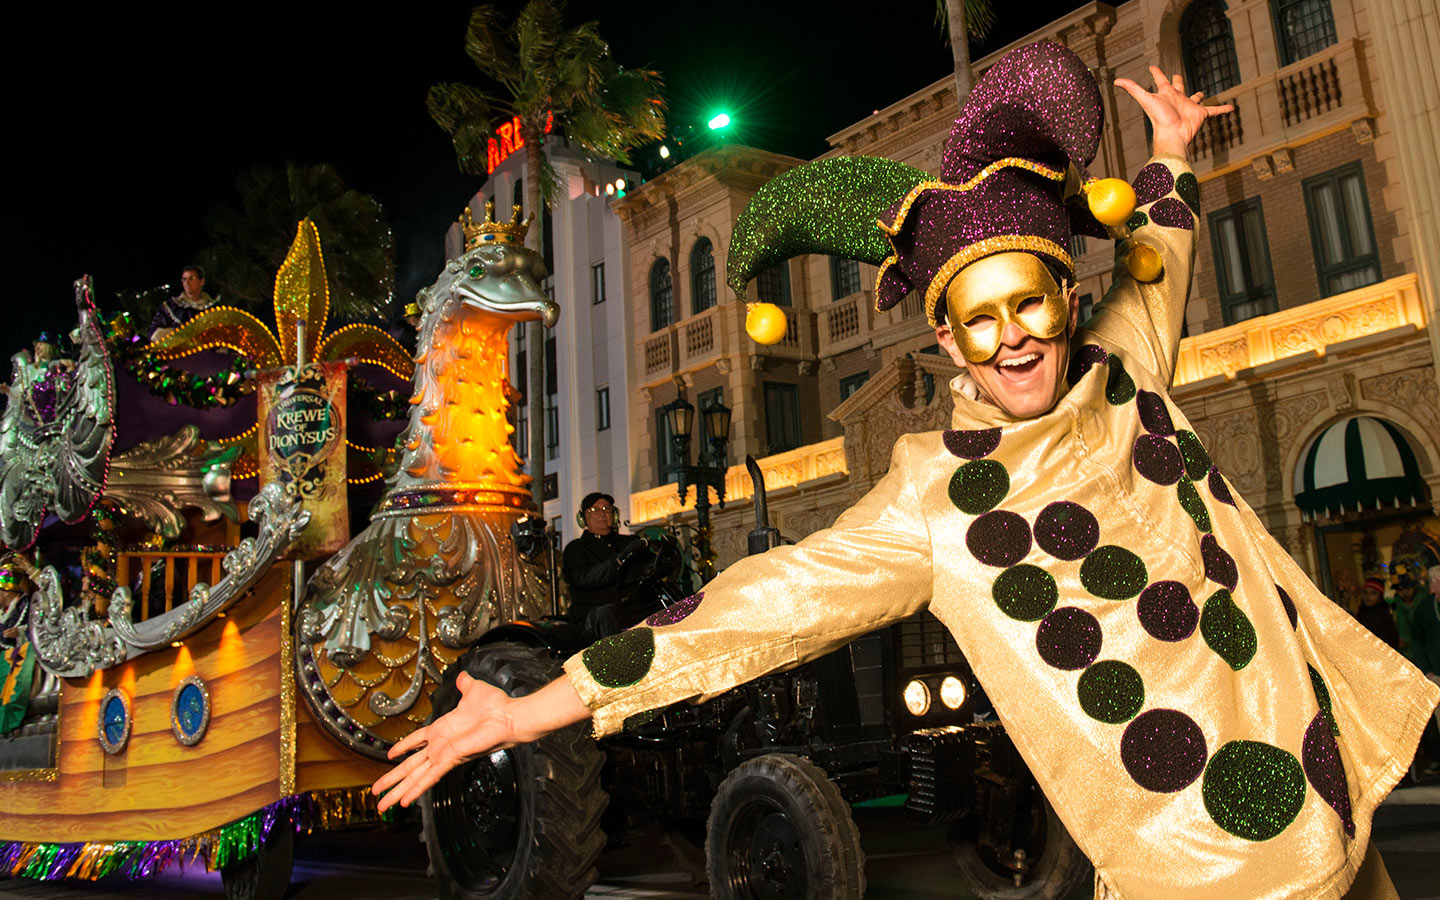 Enjoy colorful floats and catch tons of beads during Universal Orlando's Mardi Gras Celebration